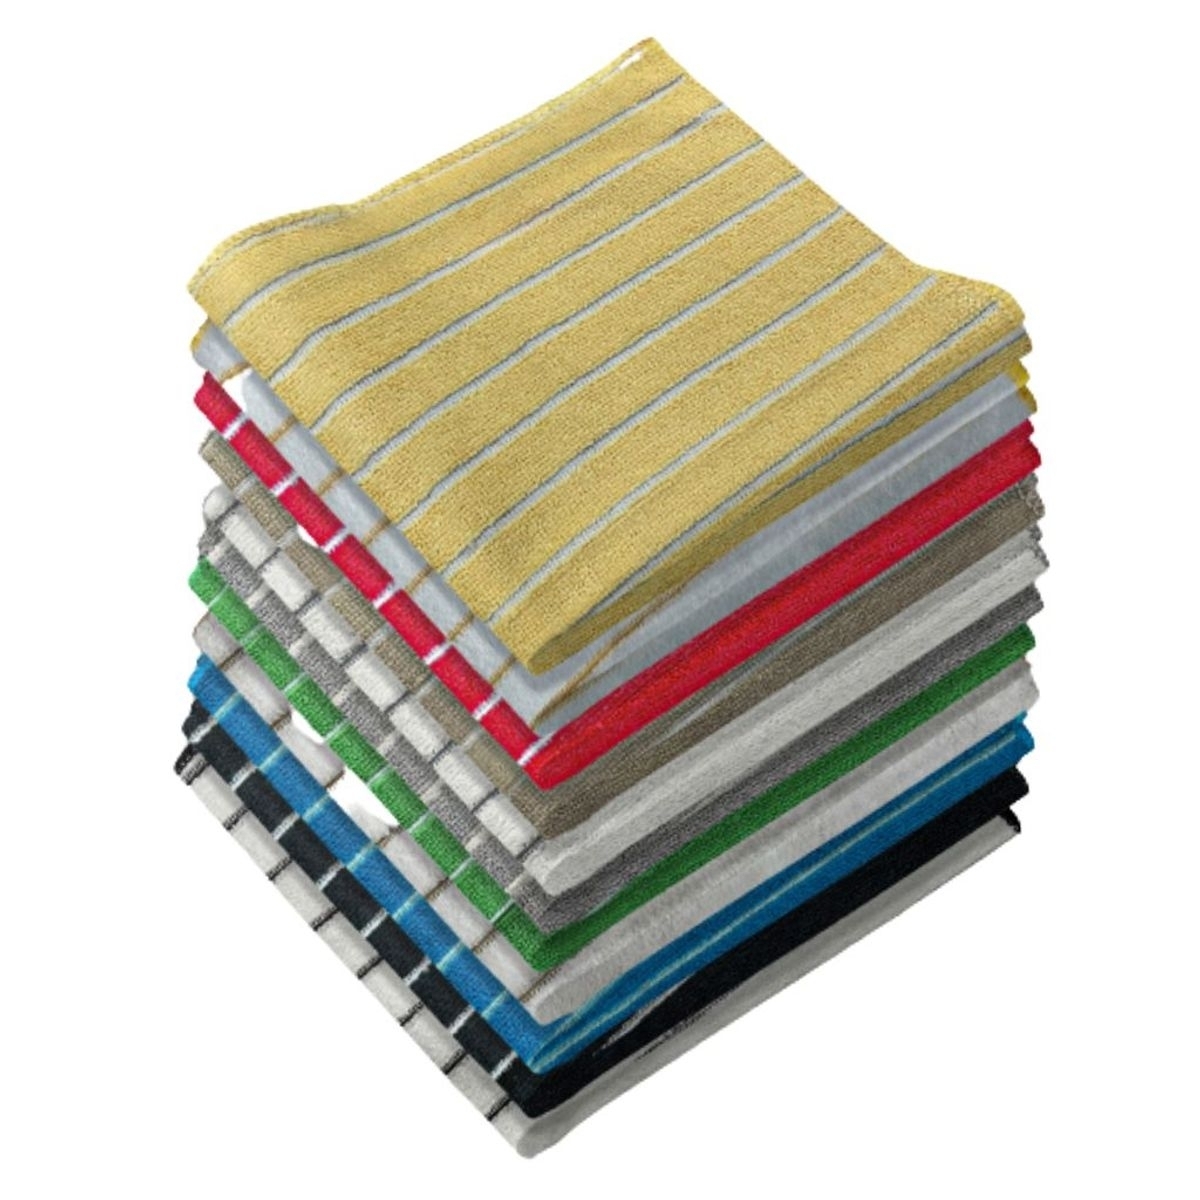 12-Pack: Ultra-Absorbent Multi Use Cleaning Super Soft Microfiber Dish Utility Rag Cloths - Striped